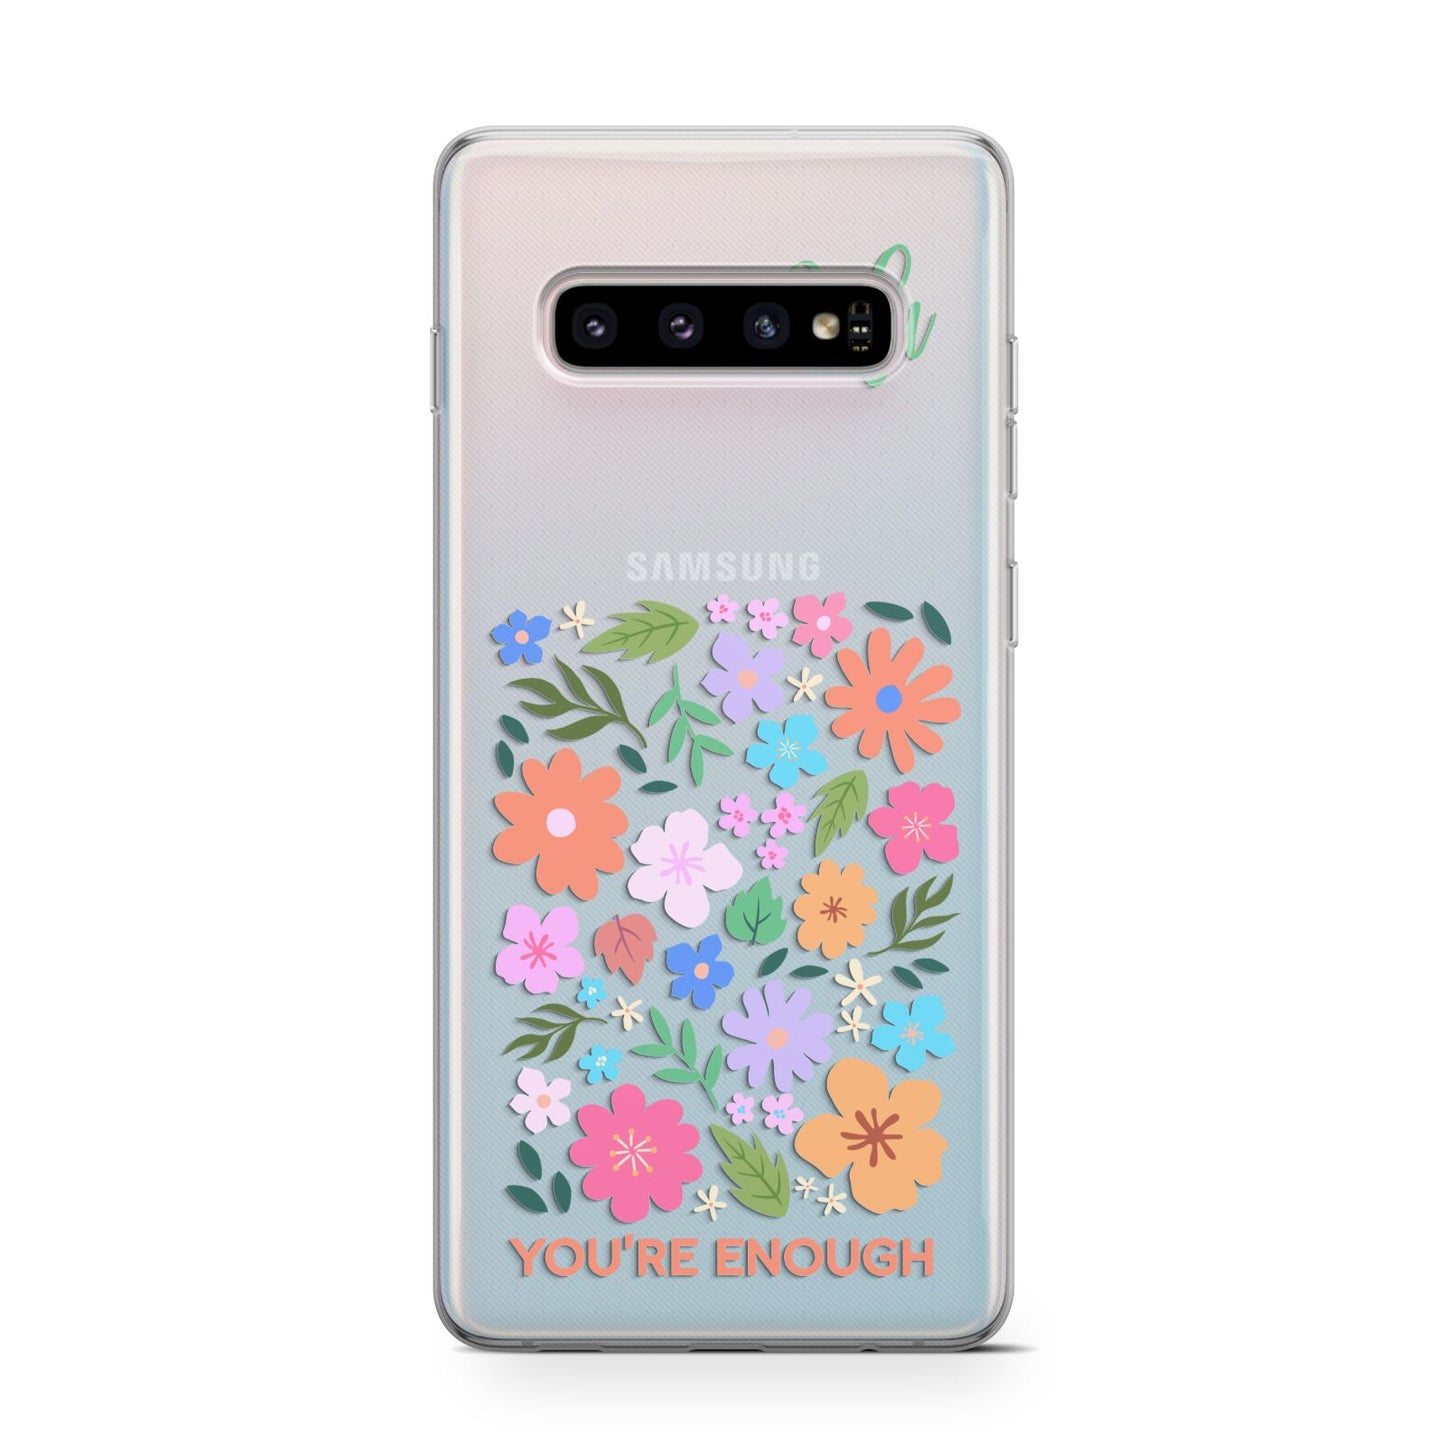 Floral Poster Samsung Galaxy S10 Case